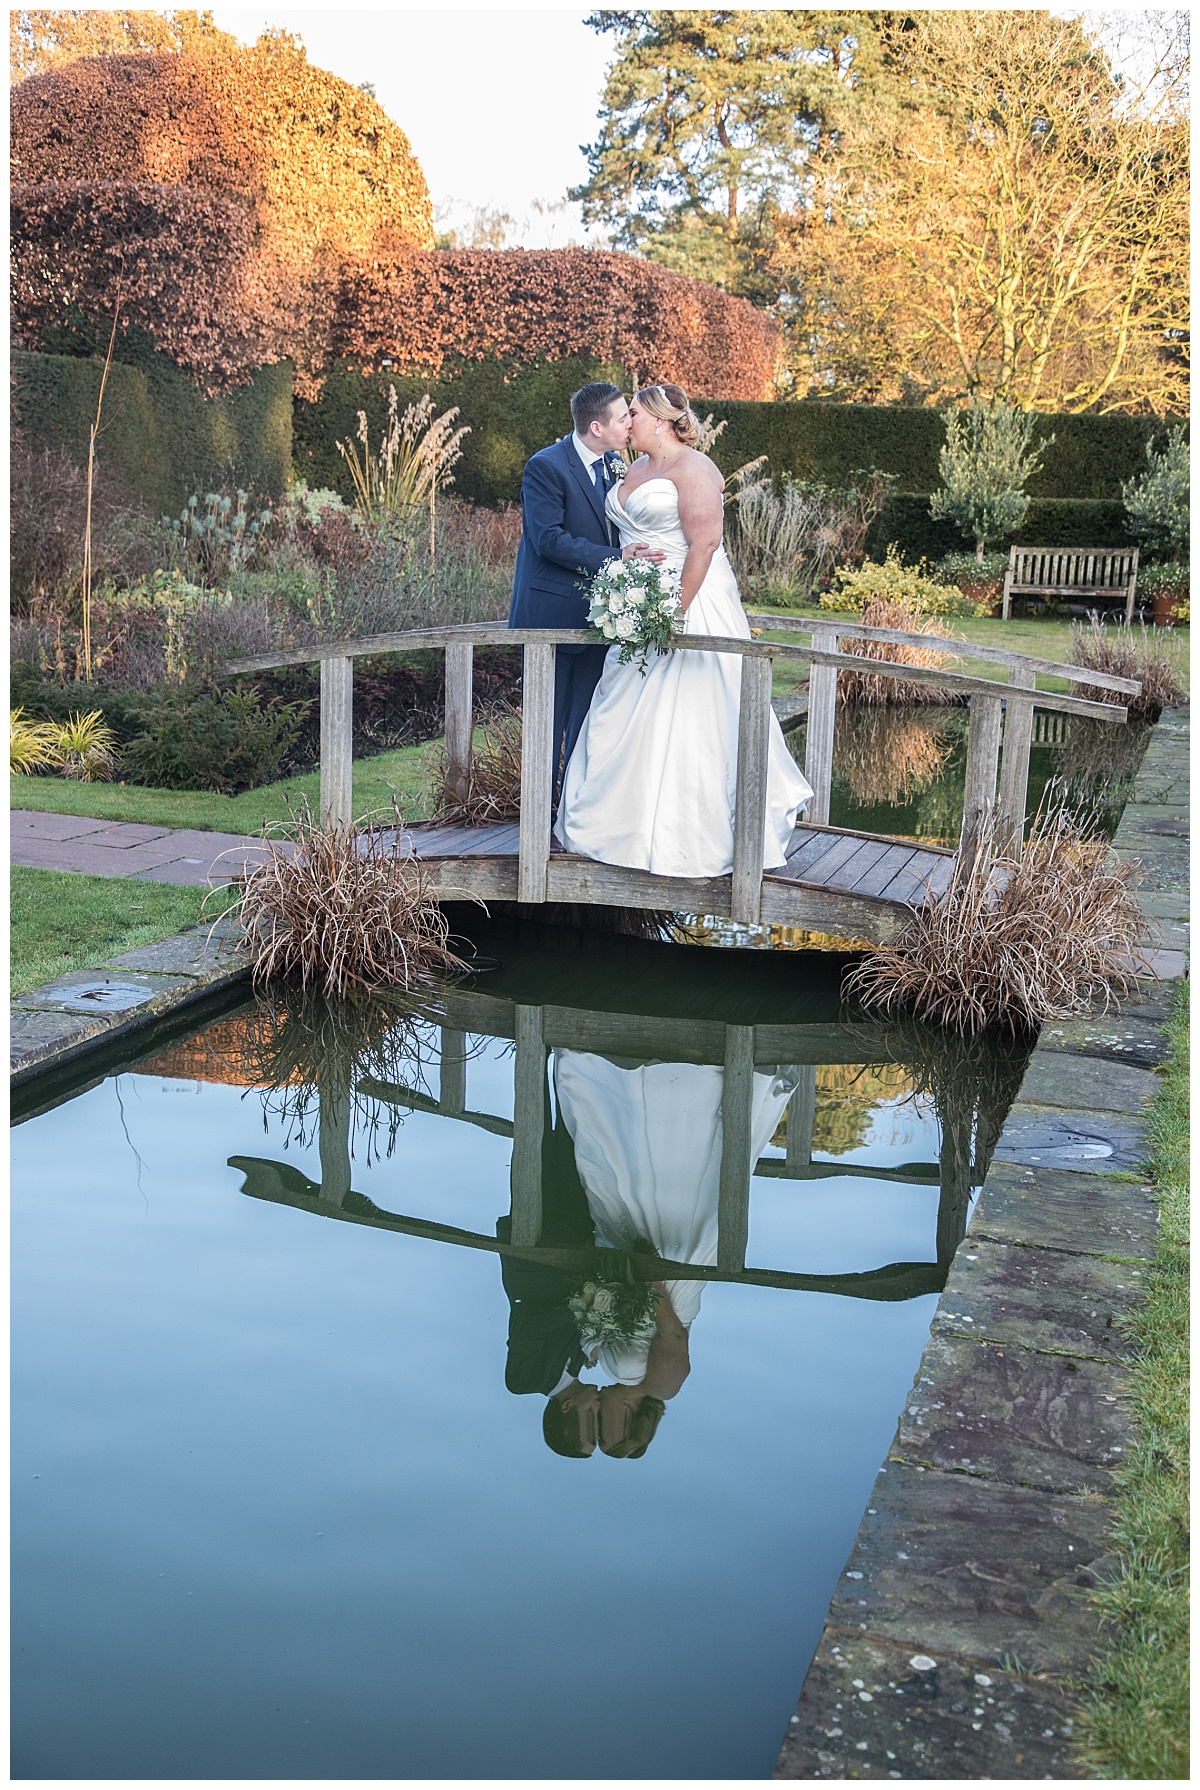 Wedding Photography Manchester - Lorna and Vinny's Abbeywood Estate and Gardens Wedding 77